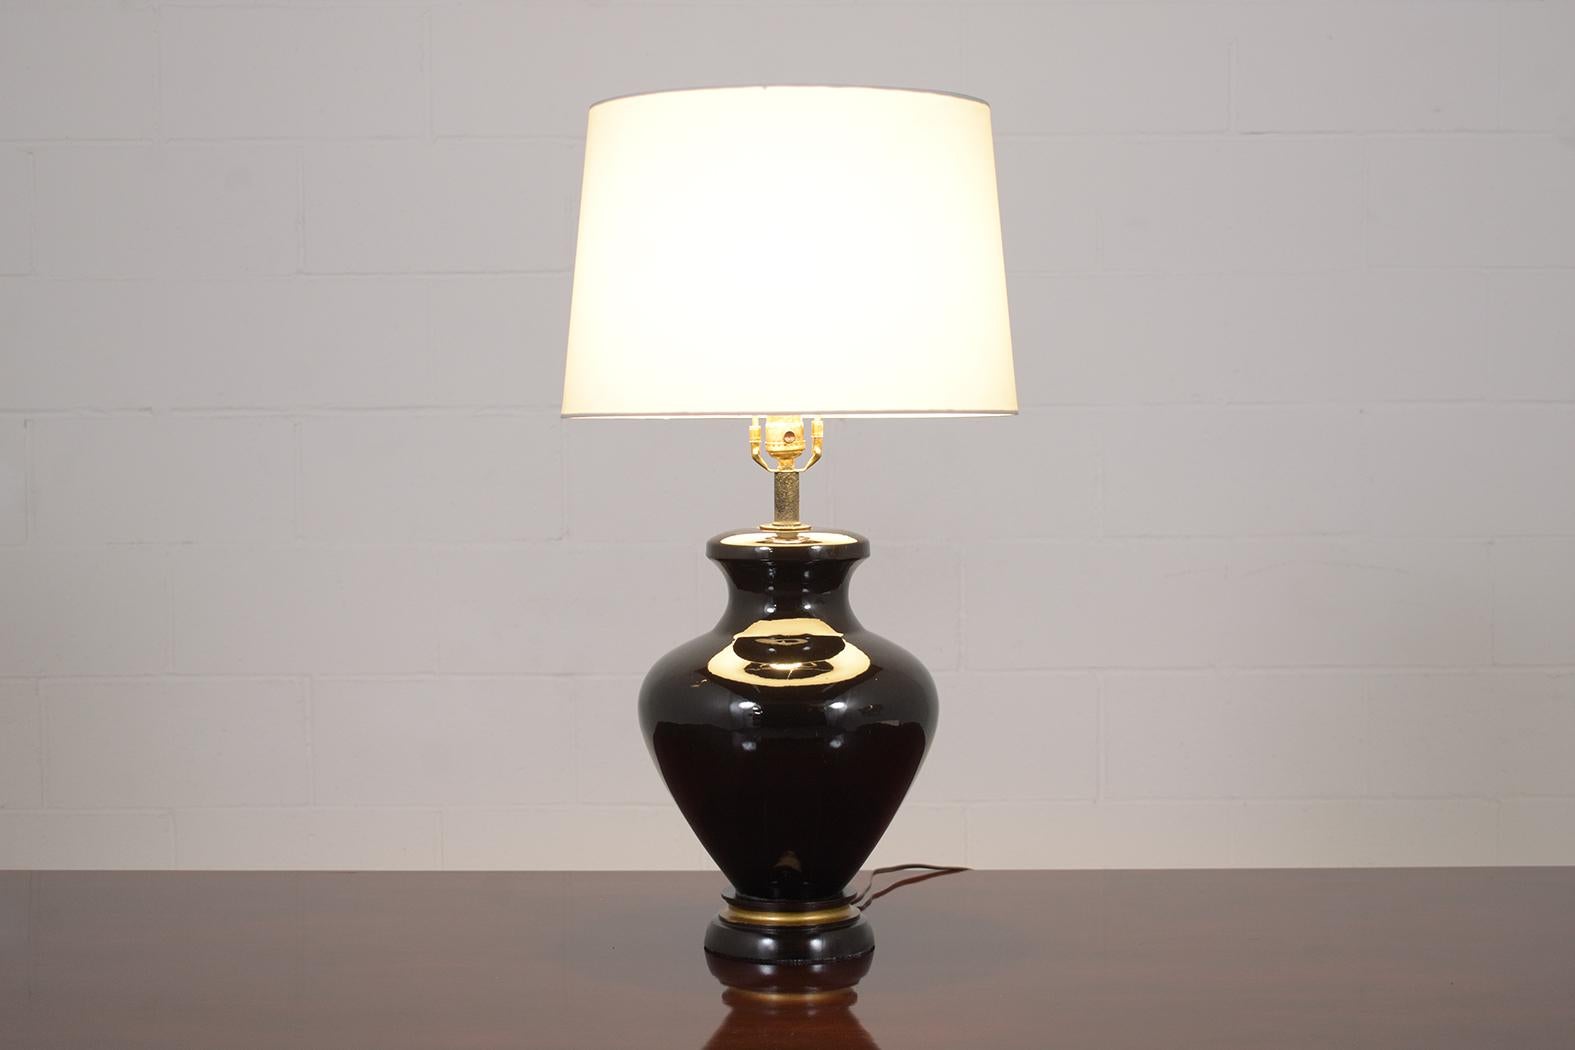 Chinese Export Hand-Painted Vintage Chinese Ceramic Table Lamp For Sale